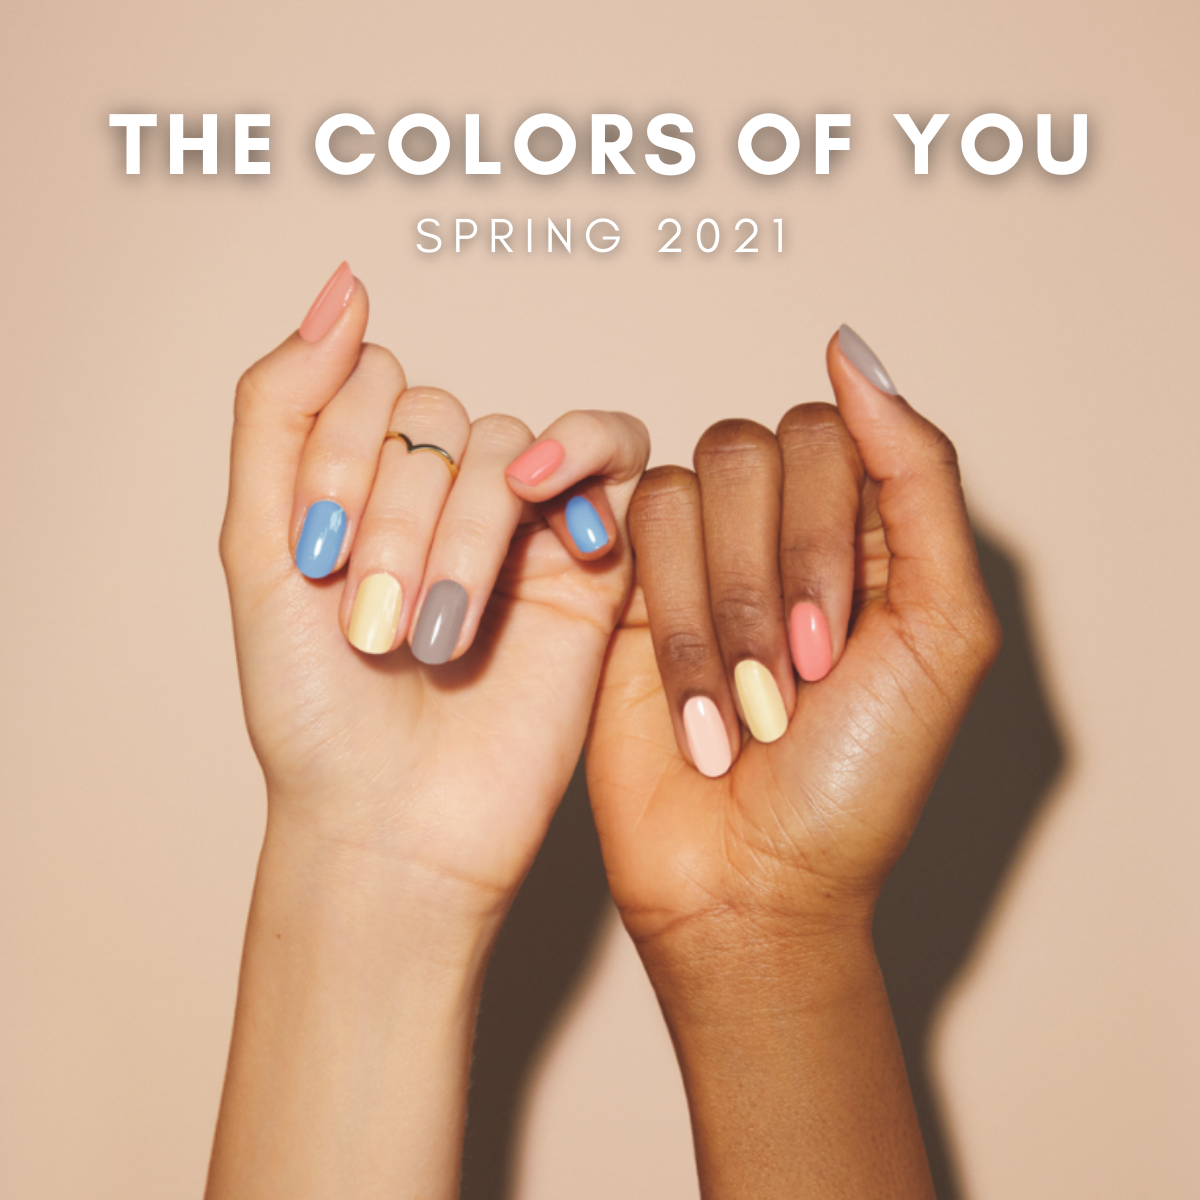 THE COLORS OF YOU